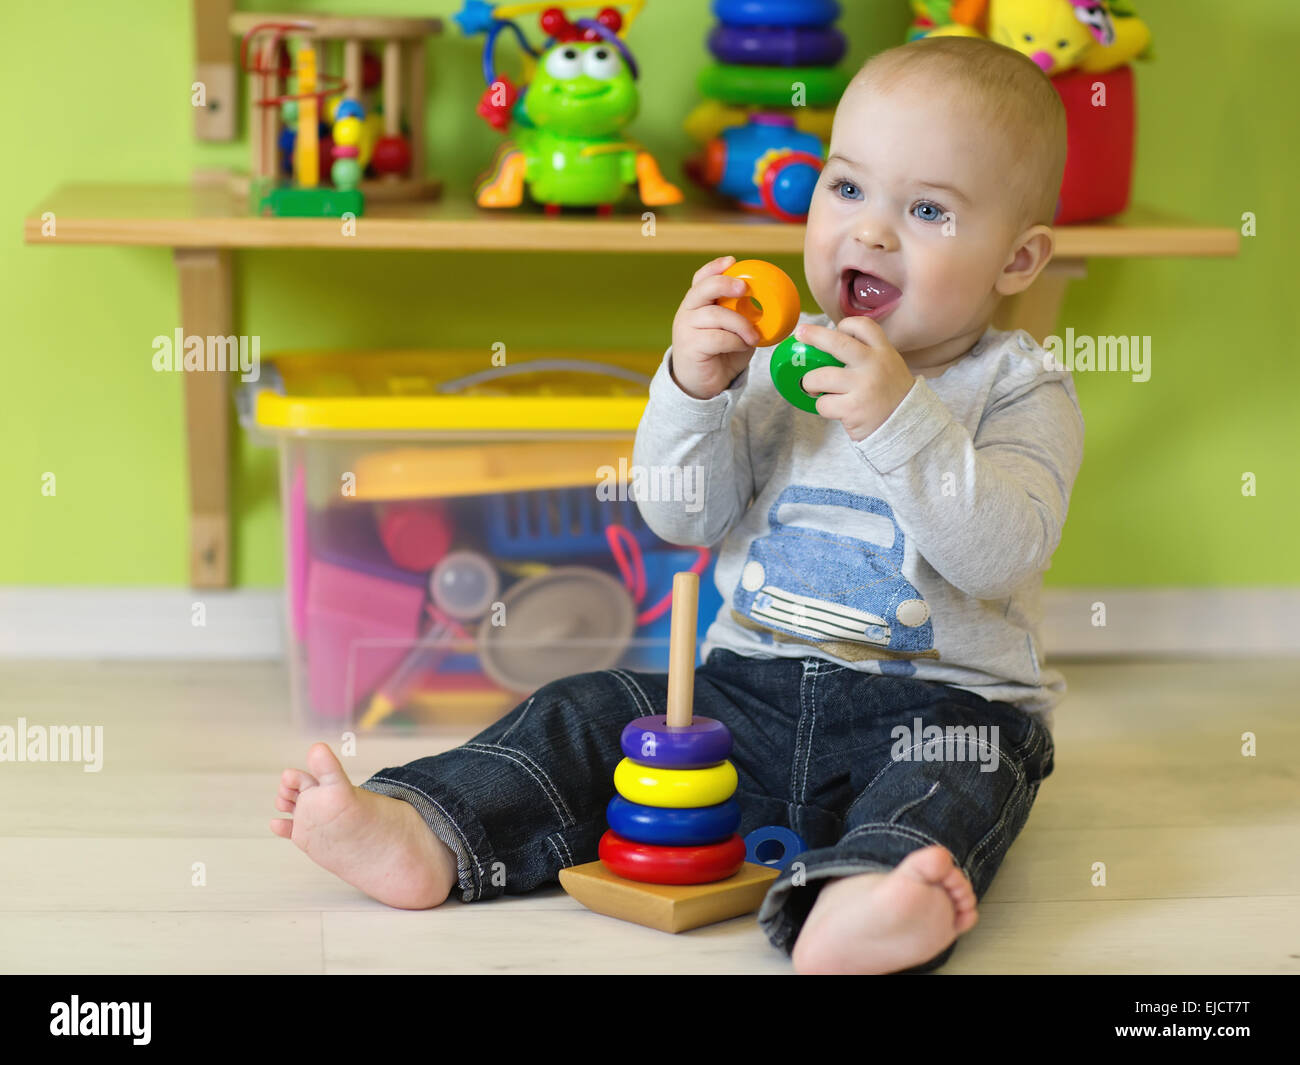 Llittle boy at play in his room Stock Photo